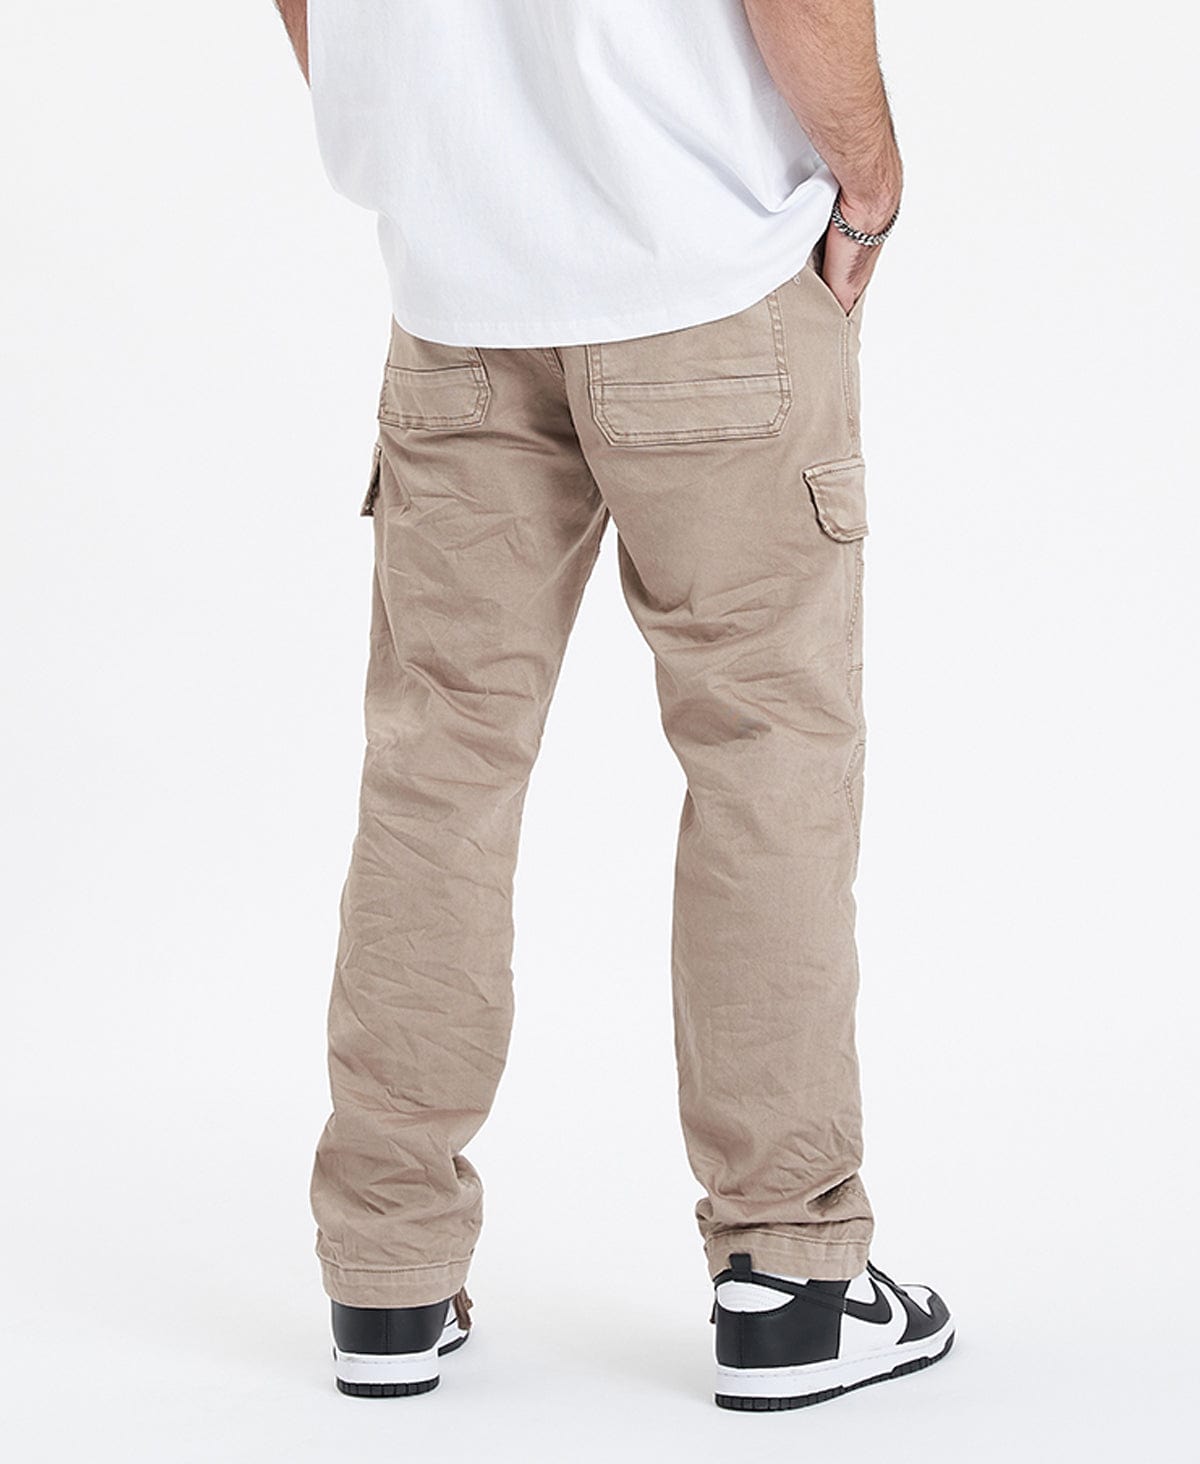 Buy Beige Side Pocket Straight Cargo Pants Cotton for Best Price, Reviews,  Free Shipping